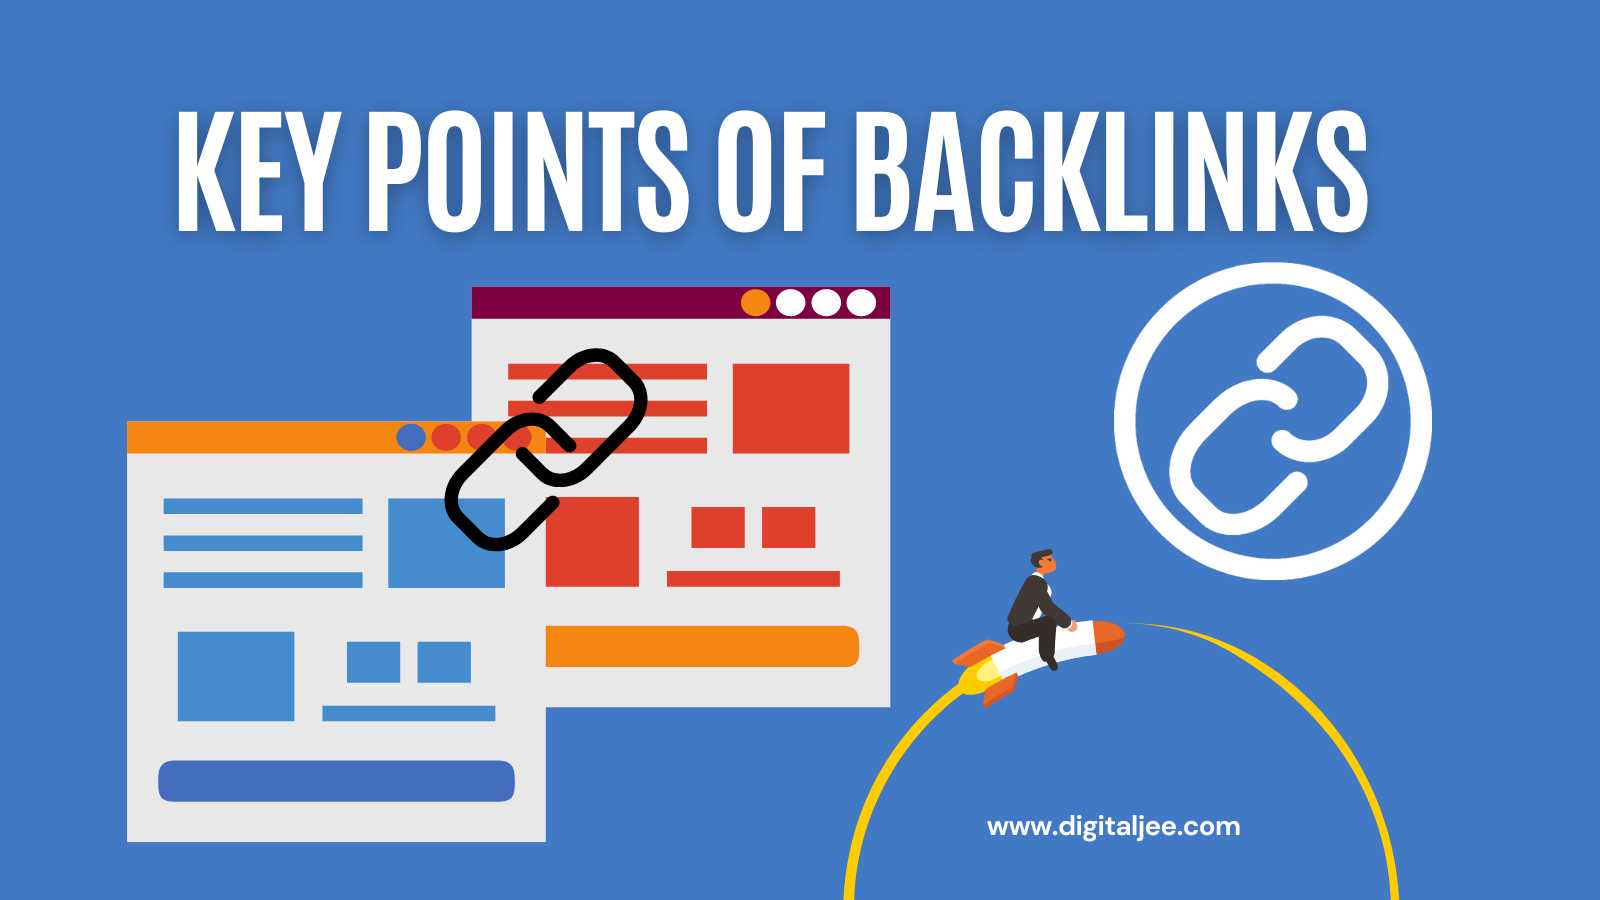 KeyPoints of High-Quality Backlinks